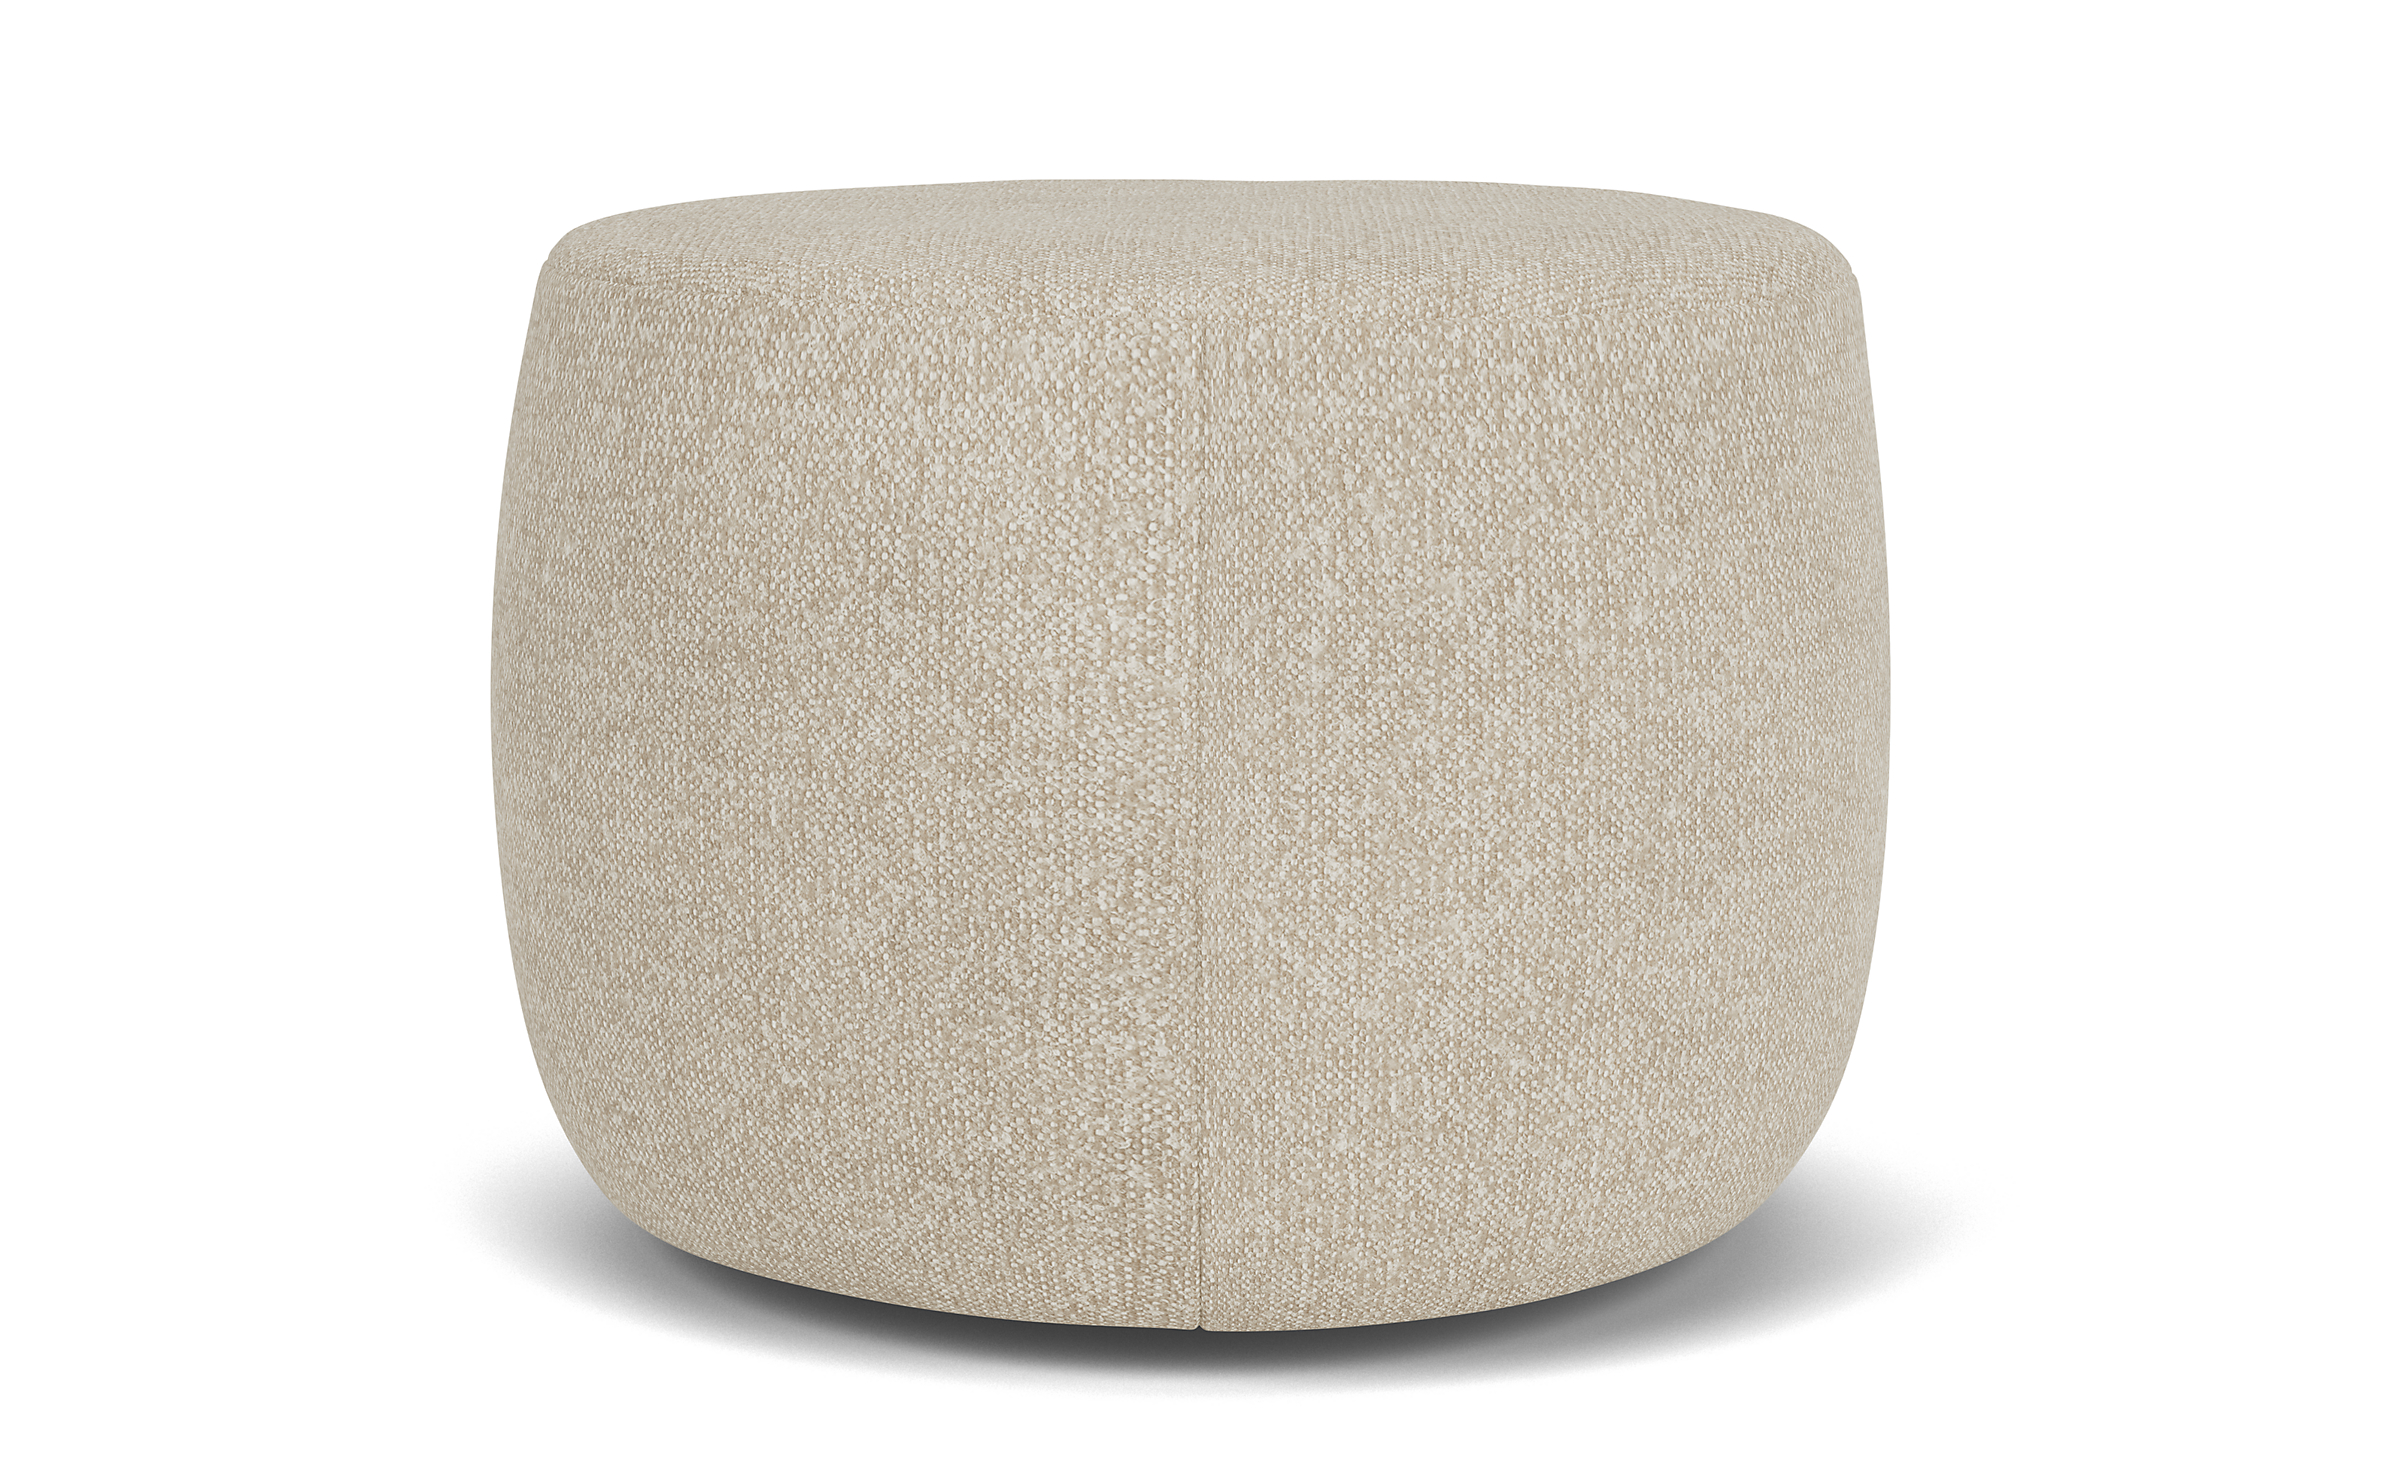 Lind 20 diam 16h Ottoman in Conley Natural